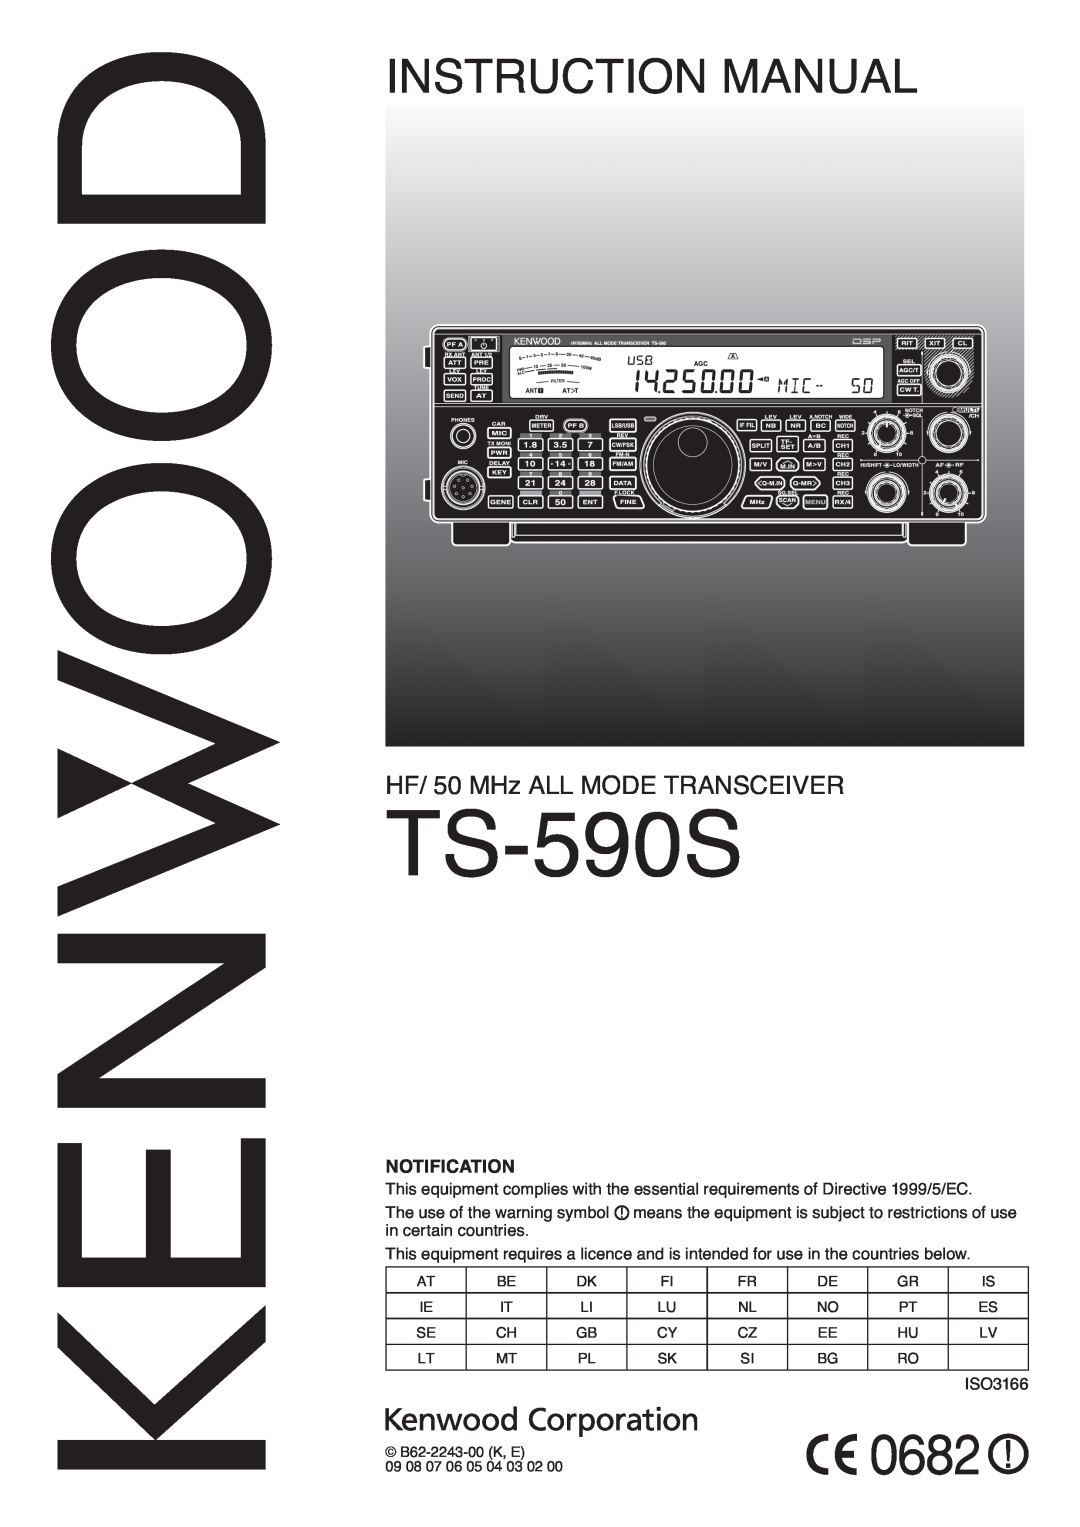 Kenwood TS-590S manual Distinctive Performance, HF/50 MHz ALL MODE TRANSCEIVER 